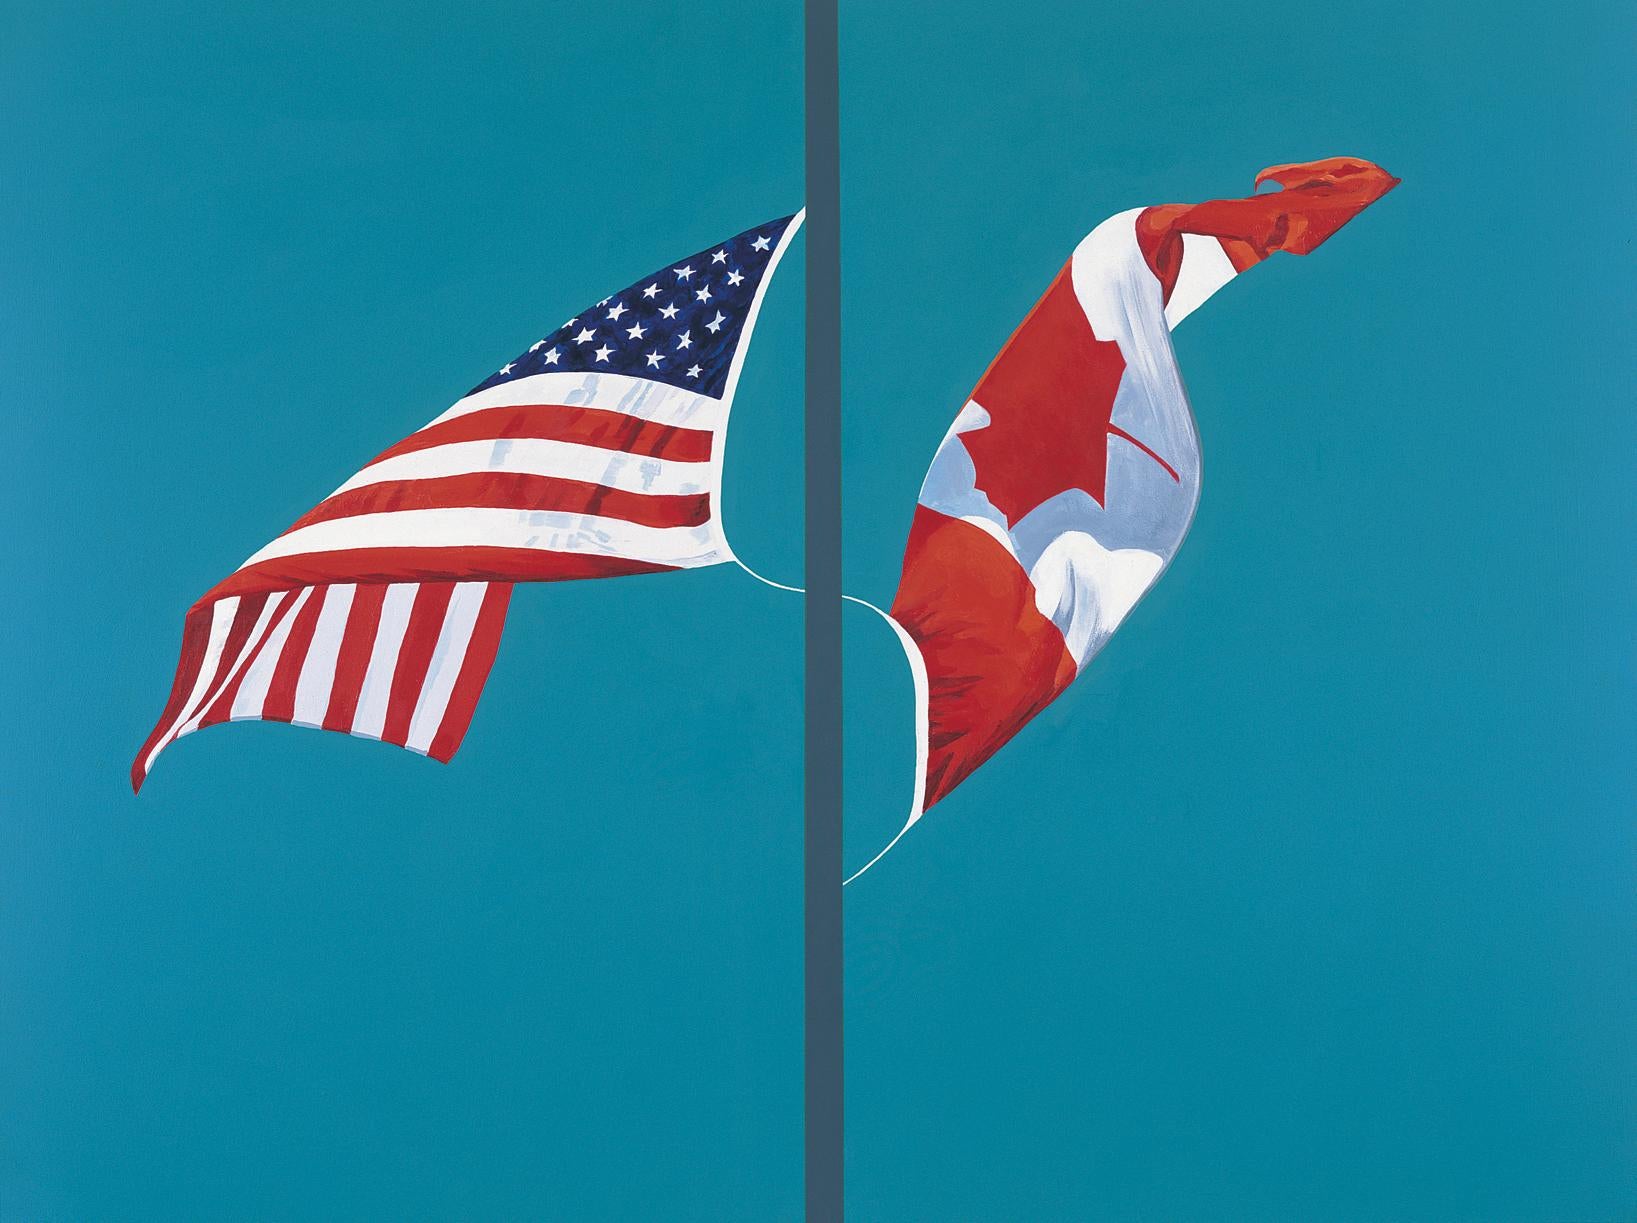 Charles Pachter Landscape Print - Side By Side 6/8 - bright, colourful, political, flag, Canada, USA, giclée print